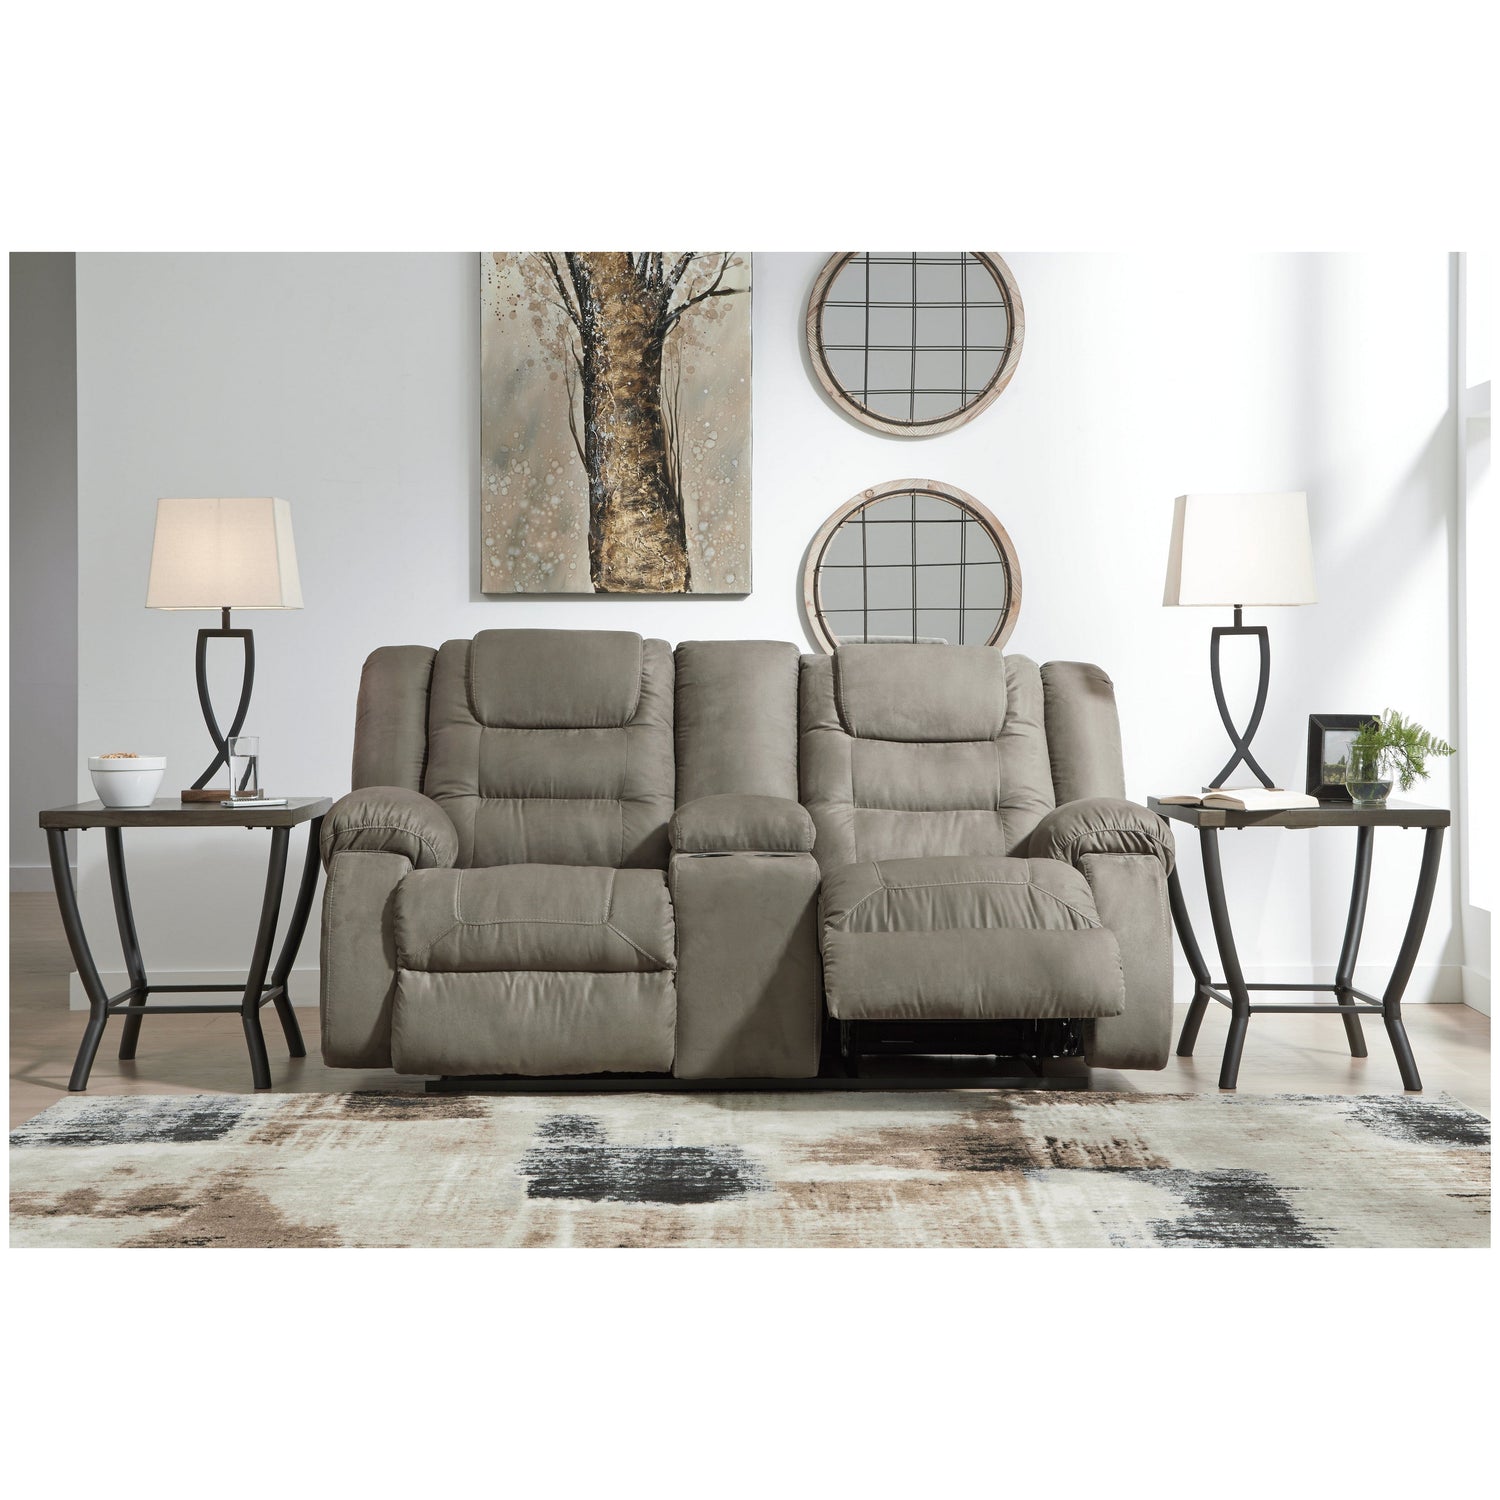 McCade Reclining Loveseat with Console Ash-1010494